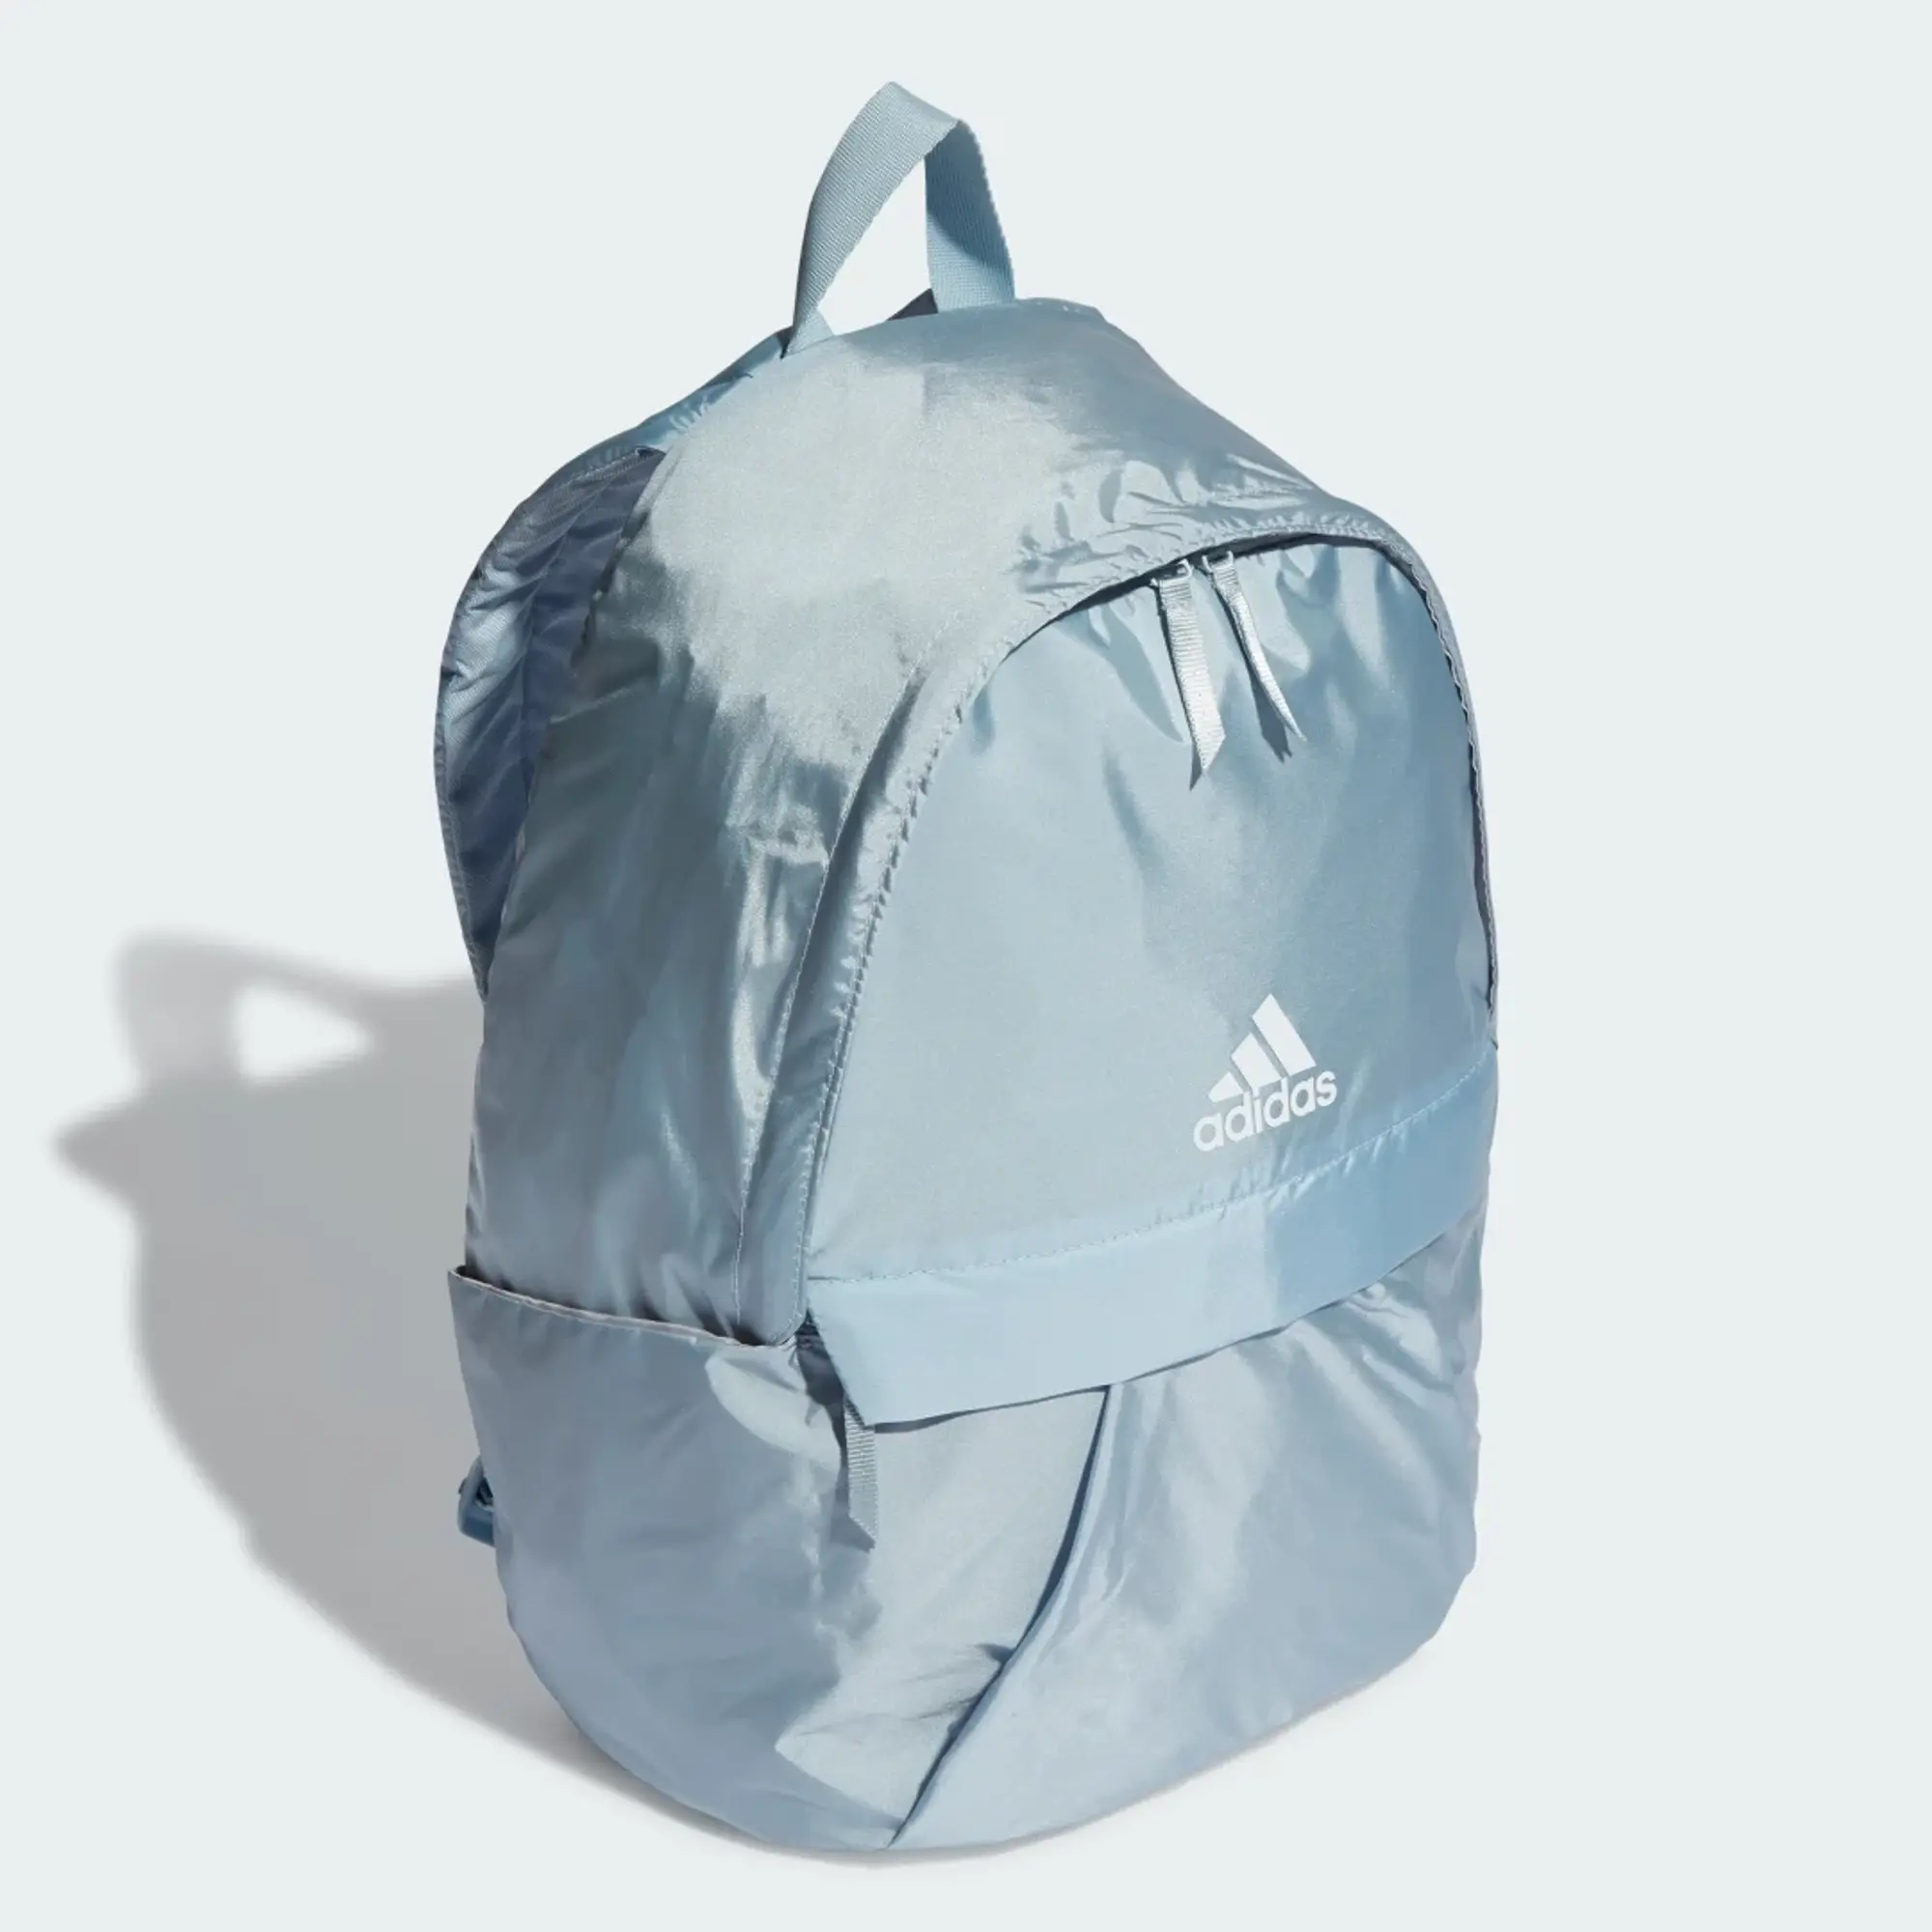 Adidas Classic Gen Z Backpack -